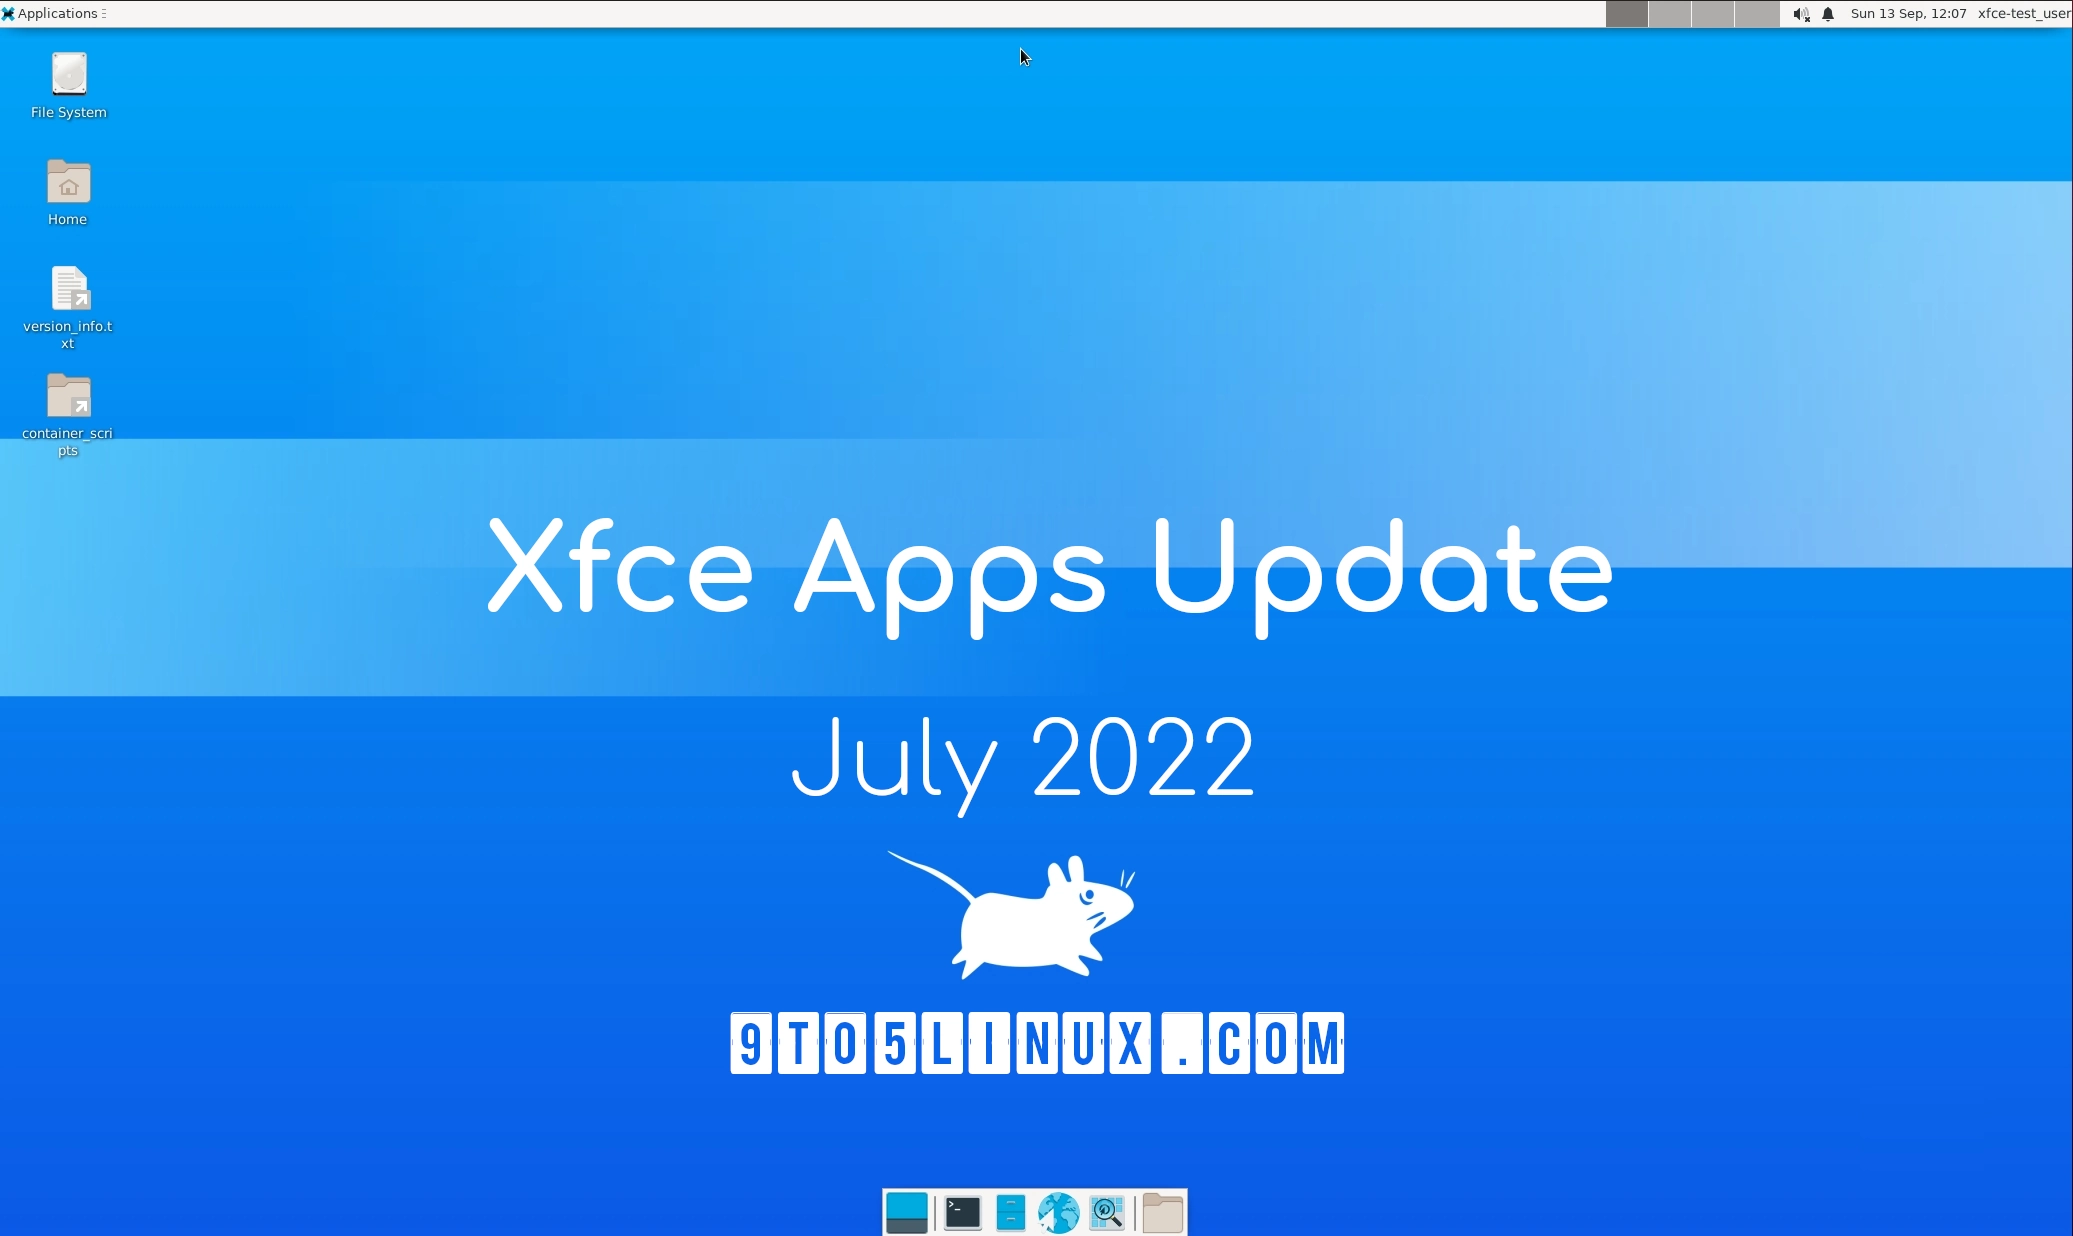 Xfce’s Apps Update for July 2022: New Releases of Mousepad, Ristretto, Catfish, and More